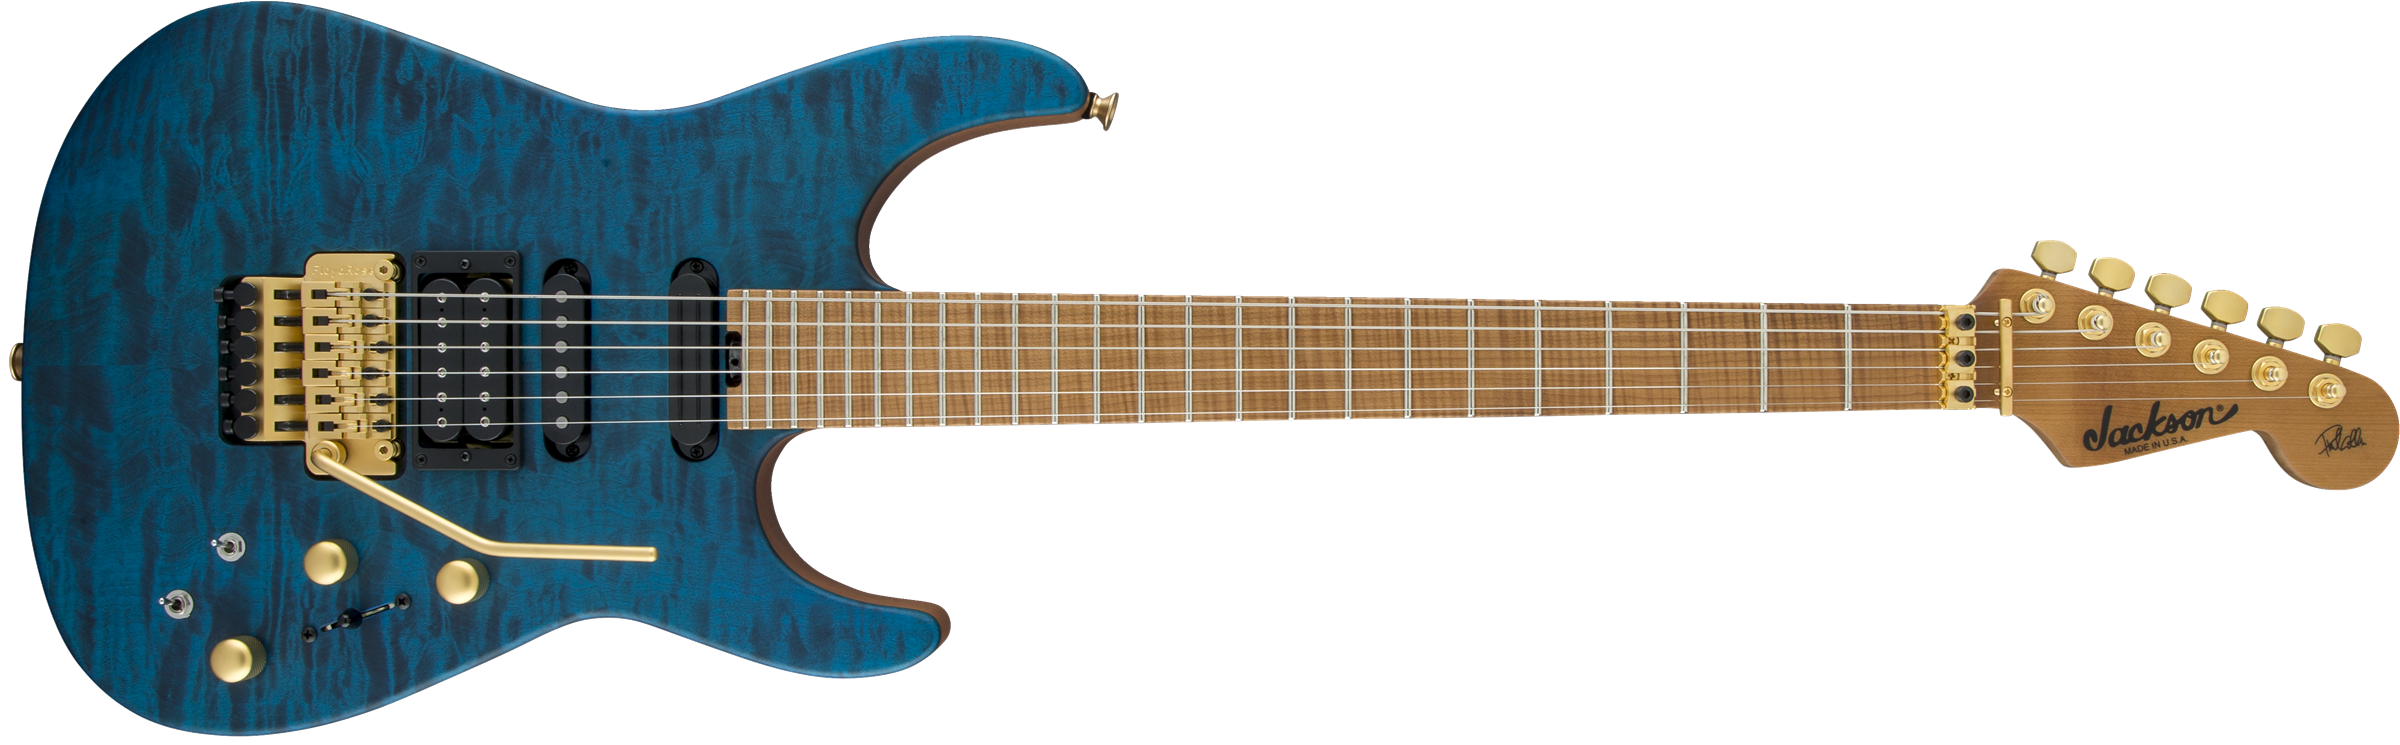 Jackson USA Custom Shop Signature Phil Collen PC1 Satin Stain Caramelized Flame Maple Fingerboard Satin Transparent Blue 2803152874 SERIAL NUMBER 13557 - 8.2 LBS